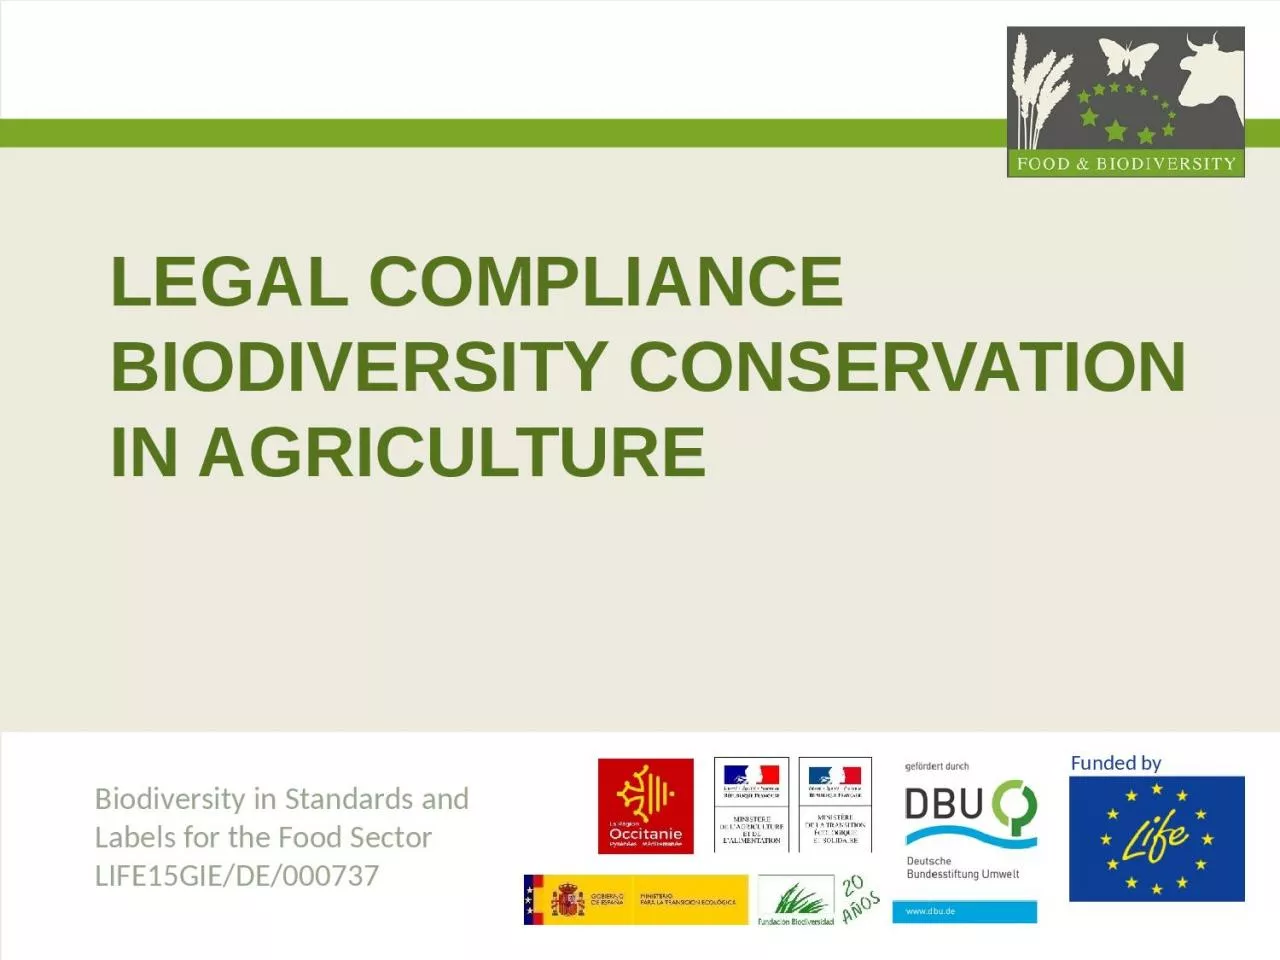 LEGAL COMPLIANCE BIODIVERSITY CONSERVATION IN AGRICULTURE